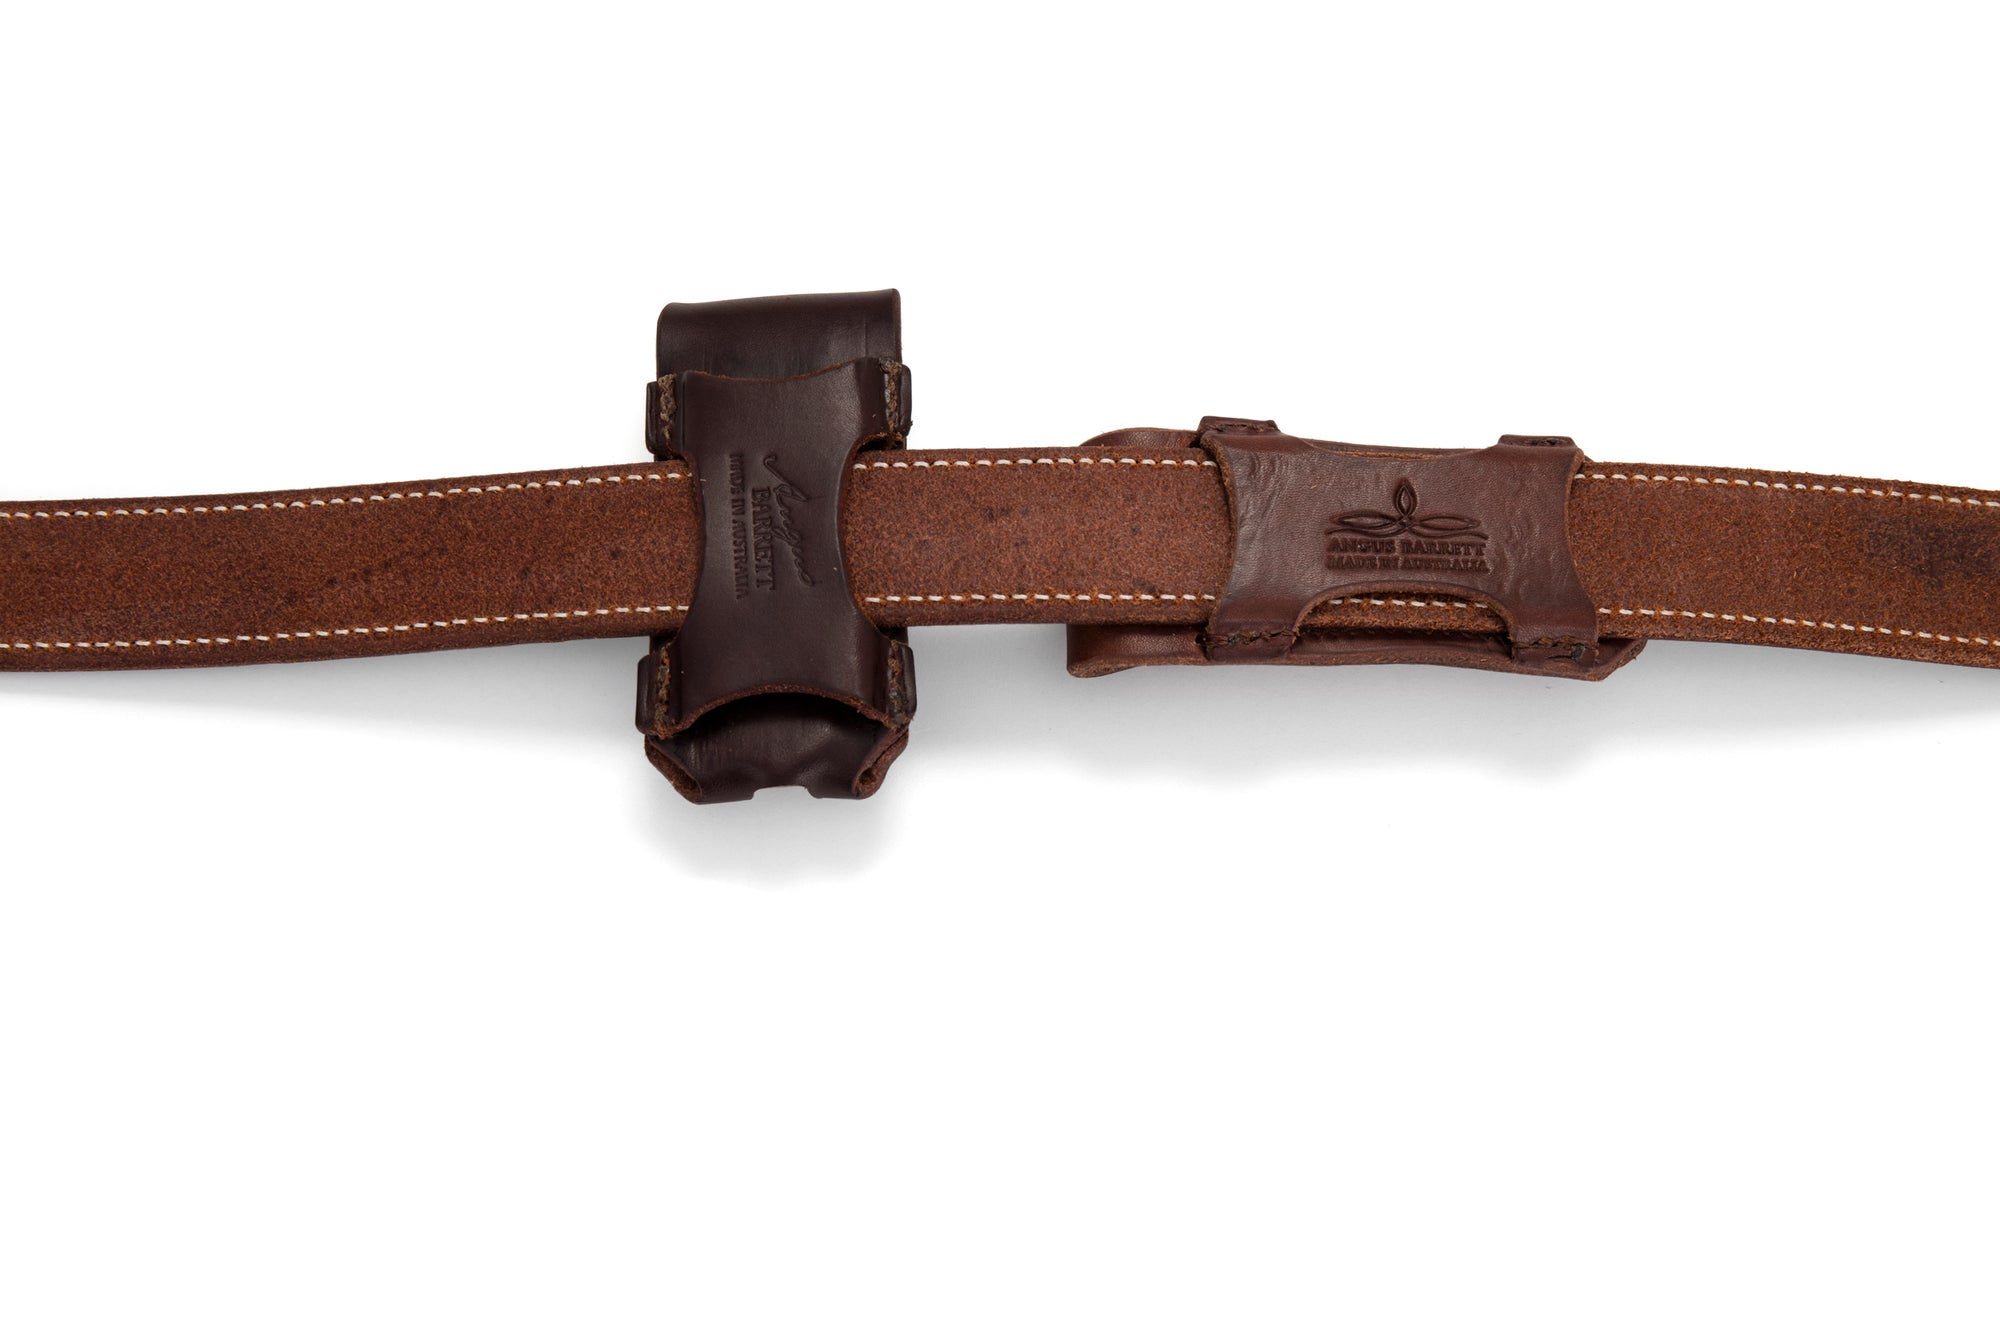 Angus Barrett Button Close Knife Pouch can be worn vertically or horizontally on your belt